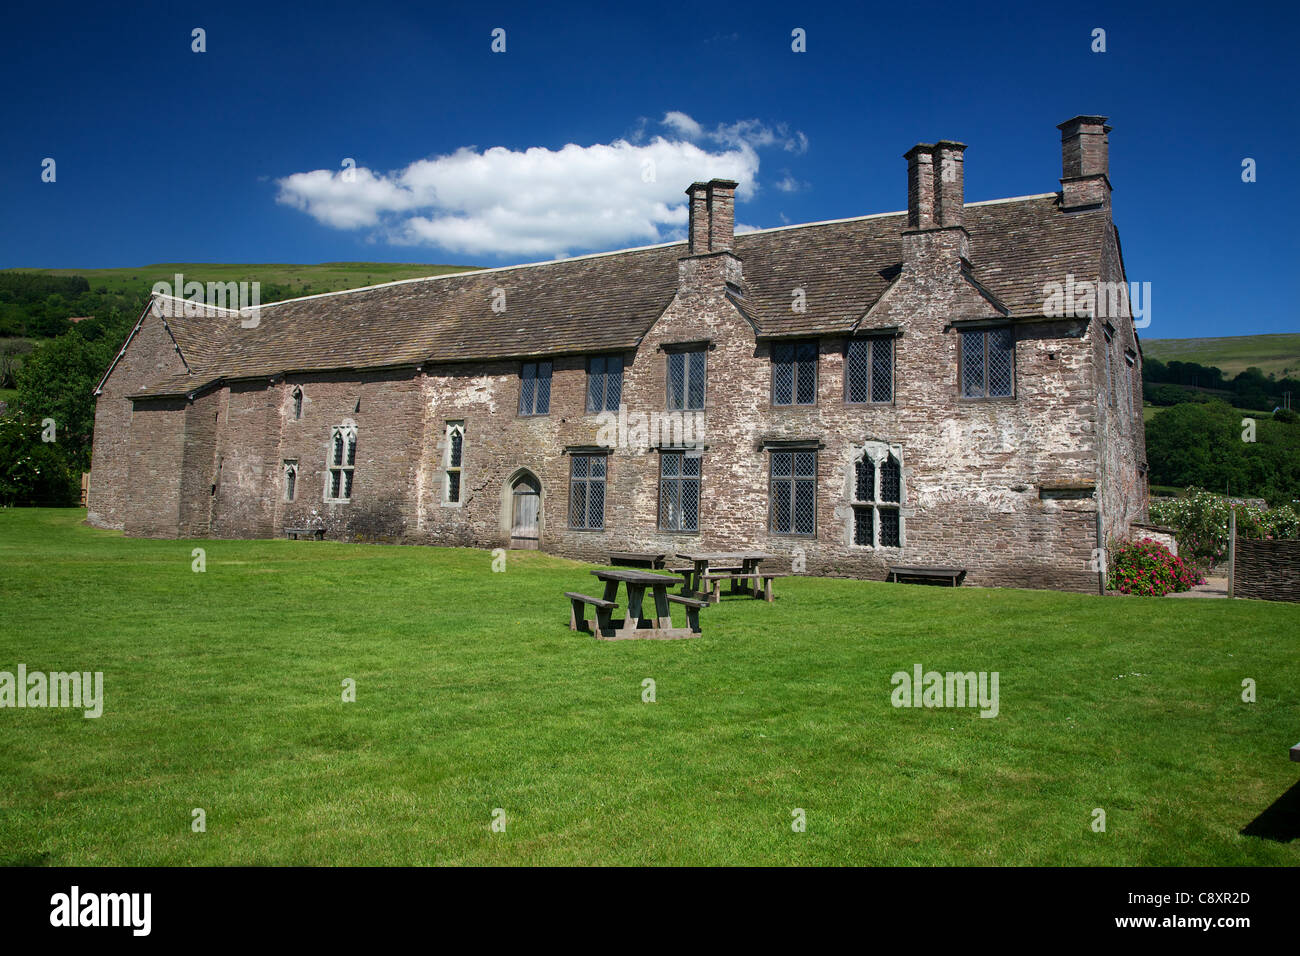 Tretower Court, Nr Crickhowell, Powys, Wales, UK. This medieval manor house dates back to the 14th Century. Stock Photo